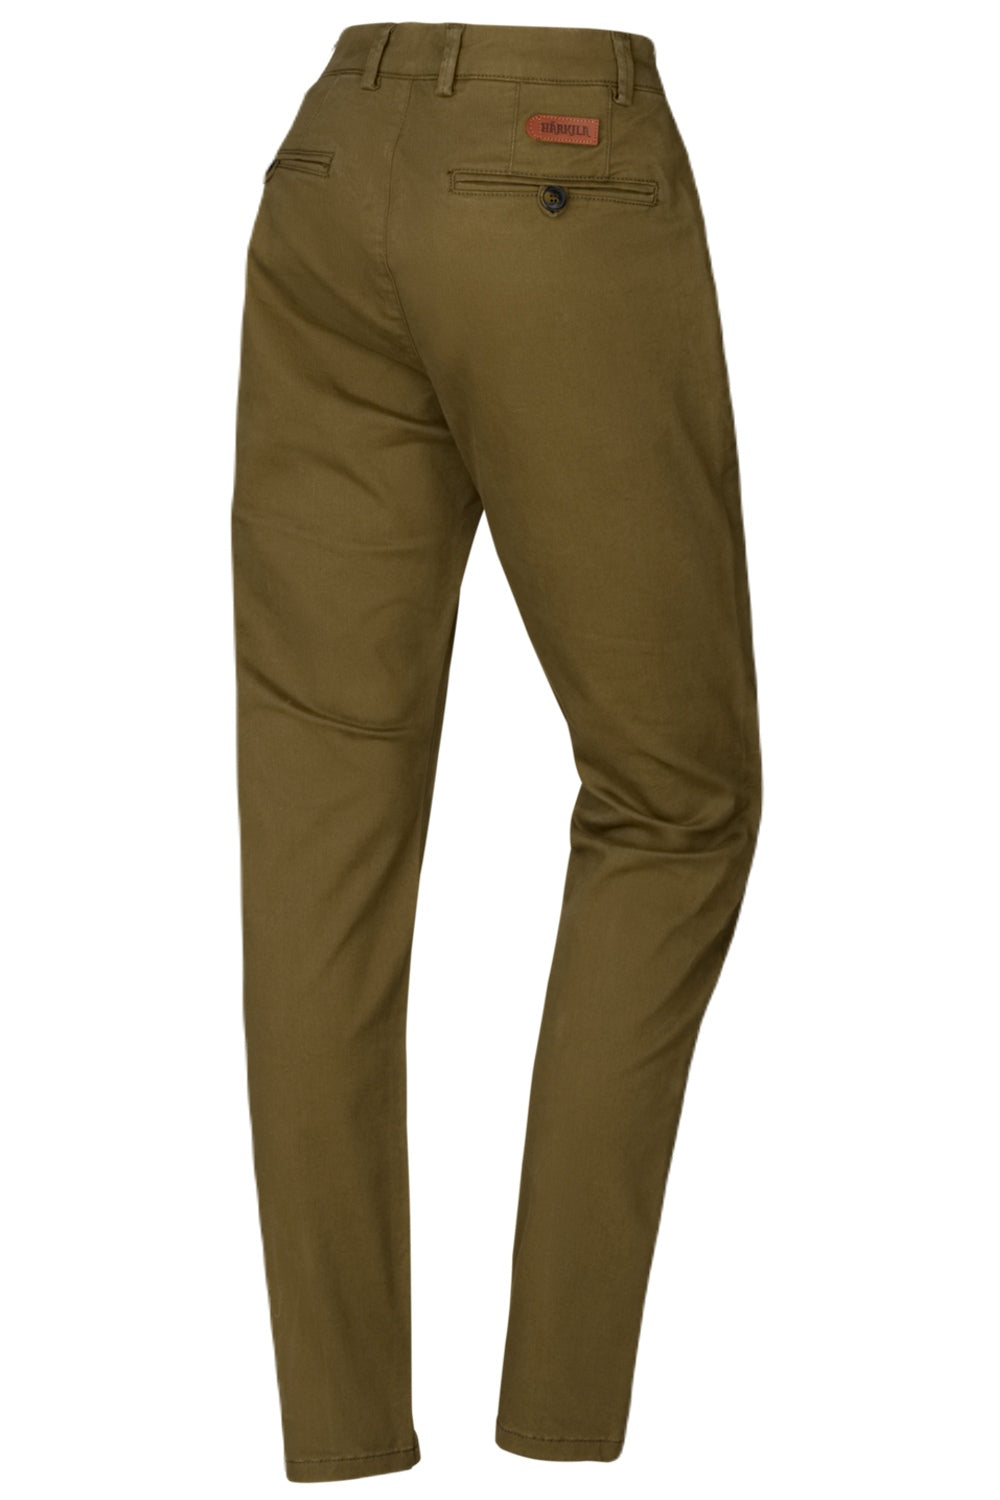 Harkila Norberg Lady Chinos in Olive